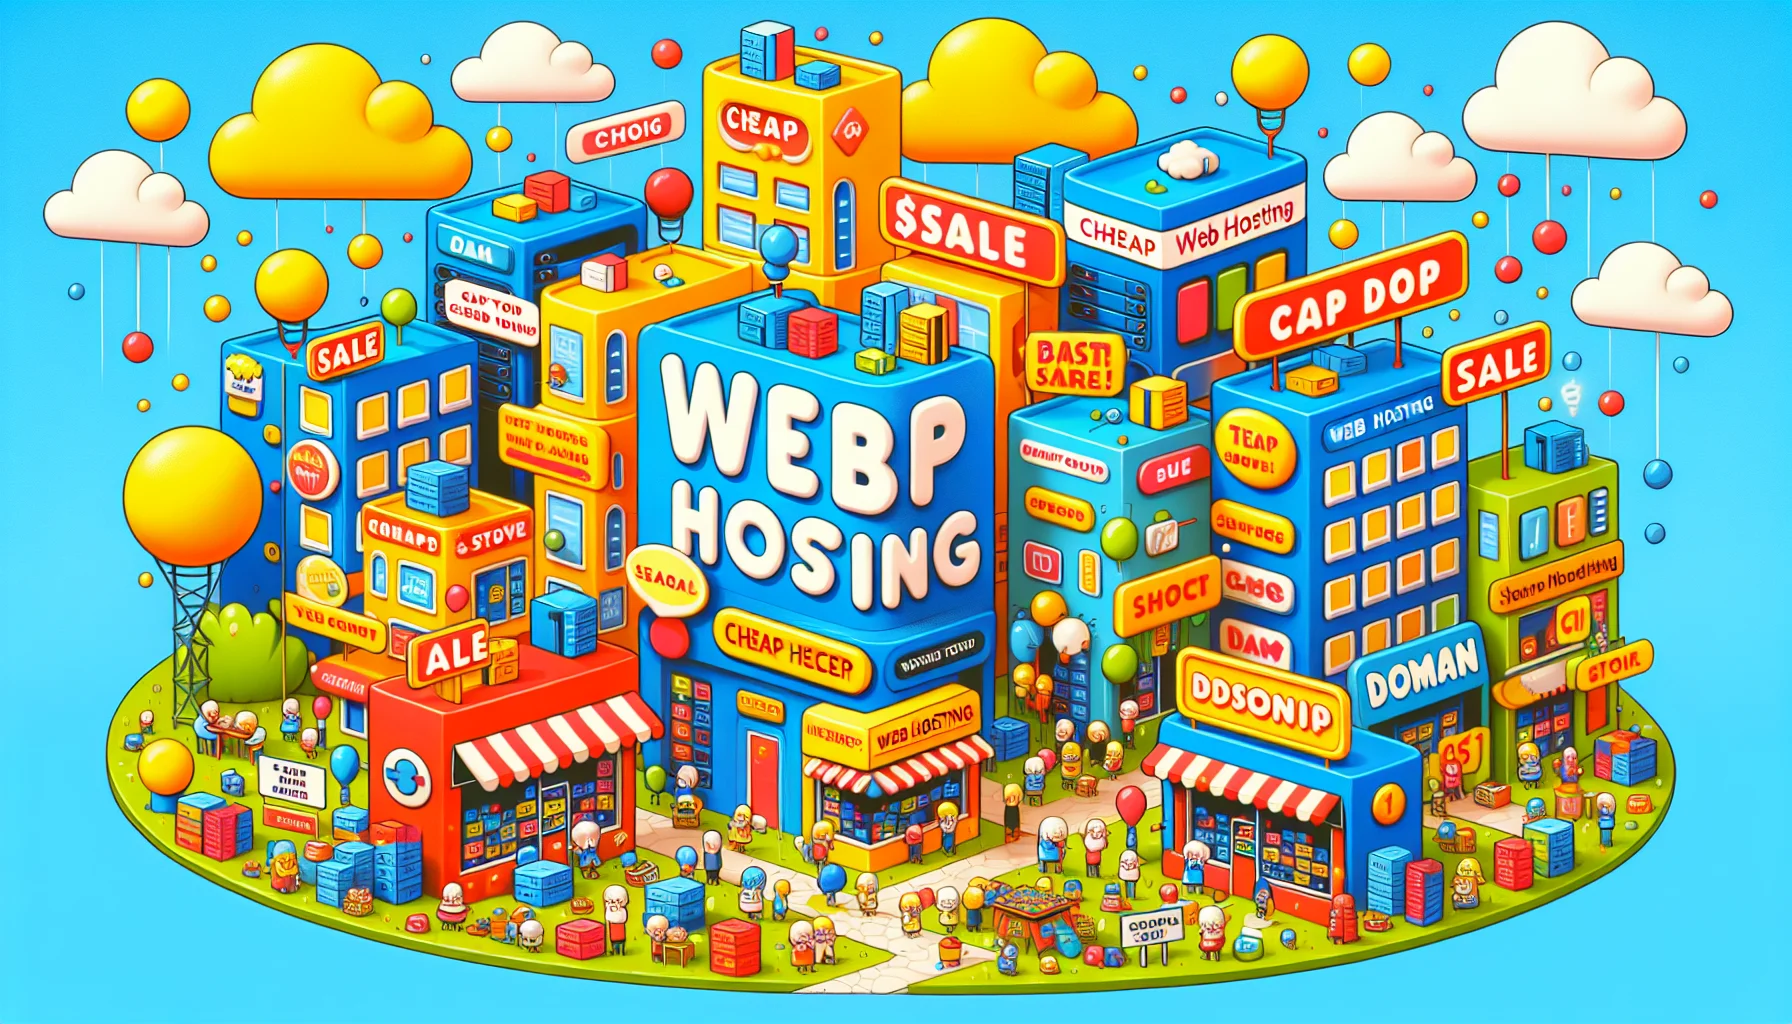 Create a playful, colorful image that portrays a humorous scenario involving cheap web hosting companies. Imagine web hosting services as tiny stores in a 'Tech Town', and they are running a lively and vibrant market. Each store is overflowing with symbols related to web technology such as servers, data clouds, and domain icons. They are having a spirited competition to offer the best deals, using humorous, oversized sale tags and comical promotional signs. This bustling scene is set against an inviting, cheerful landscape that stimulates curiosity and interest in web hosting.